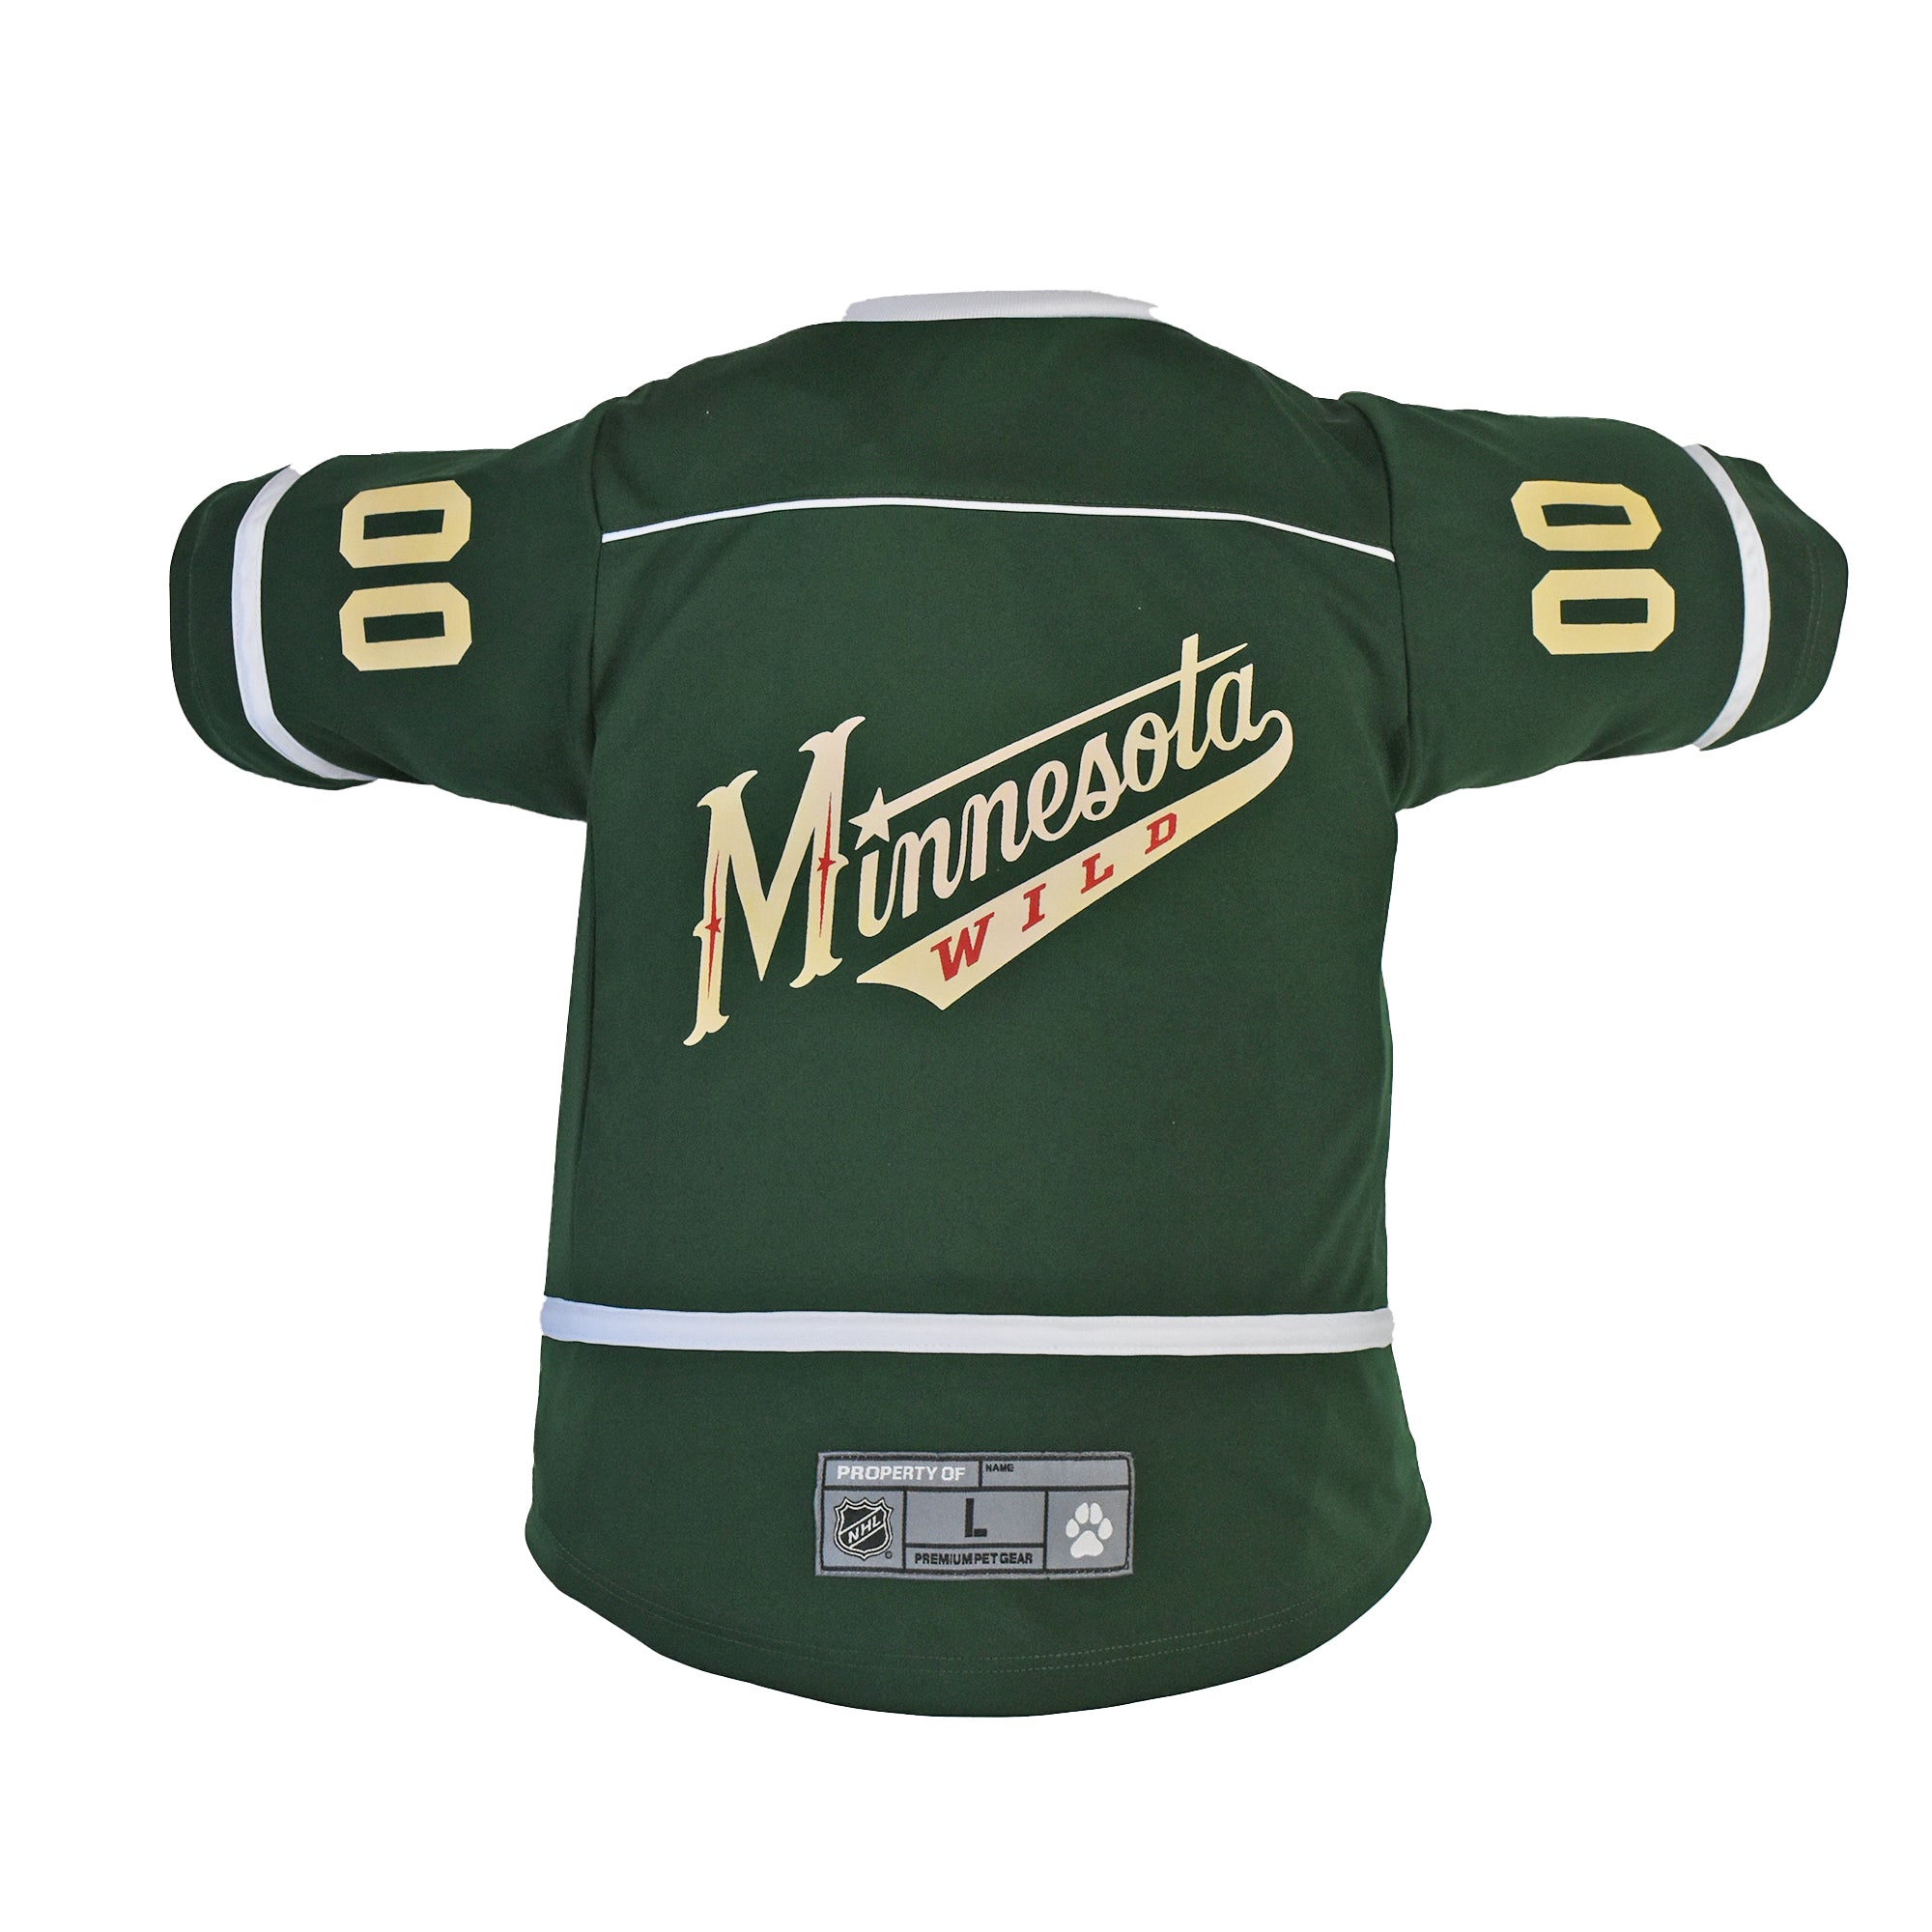 NHL Minnesota Wild Jersey for Dogs & Cats, Small. - Let Your Pet